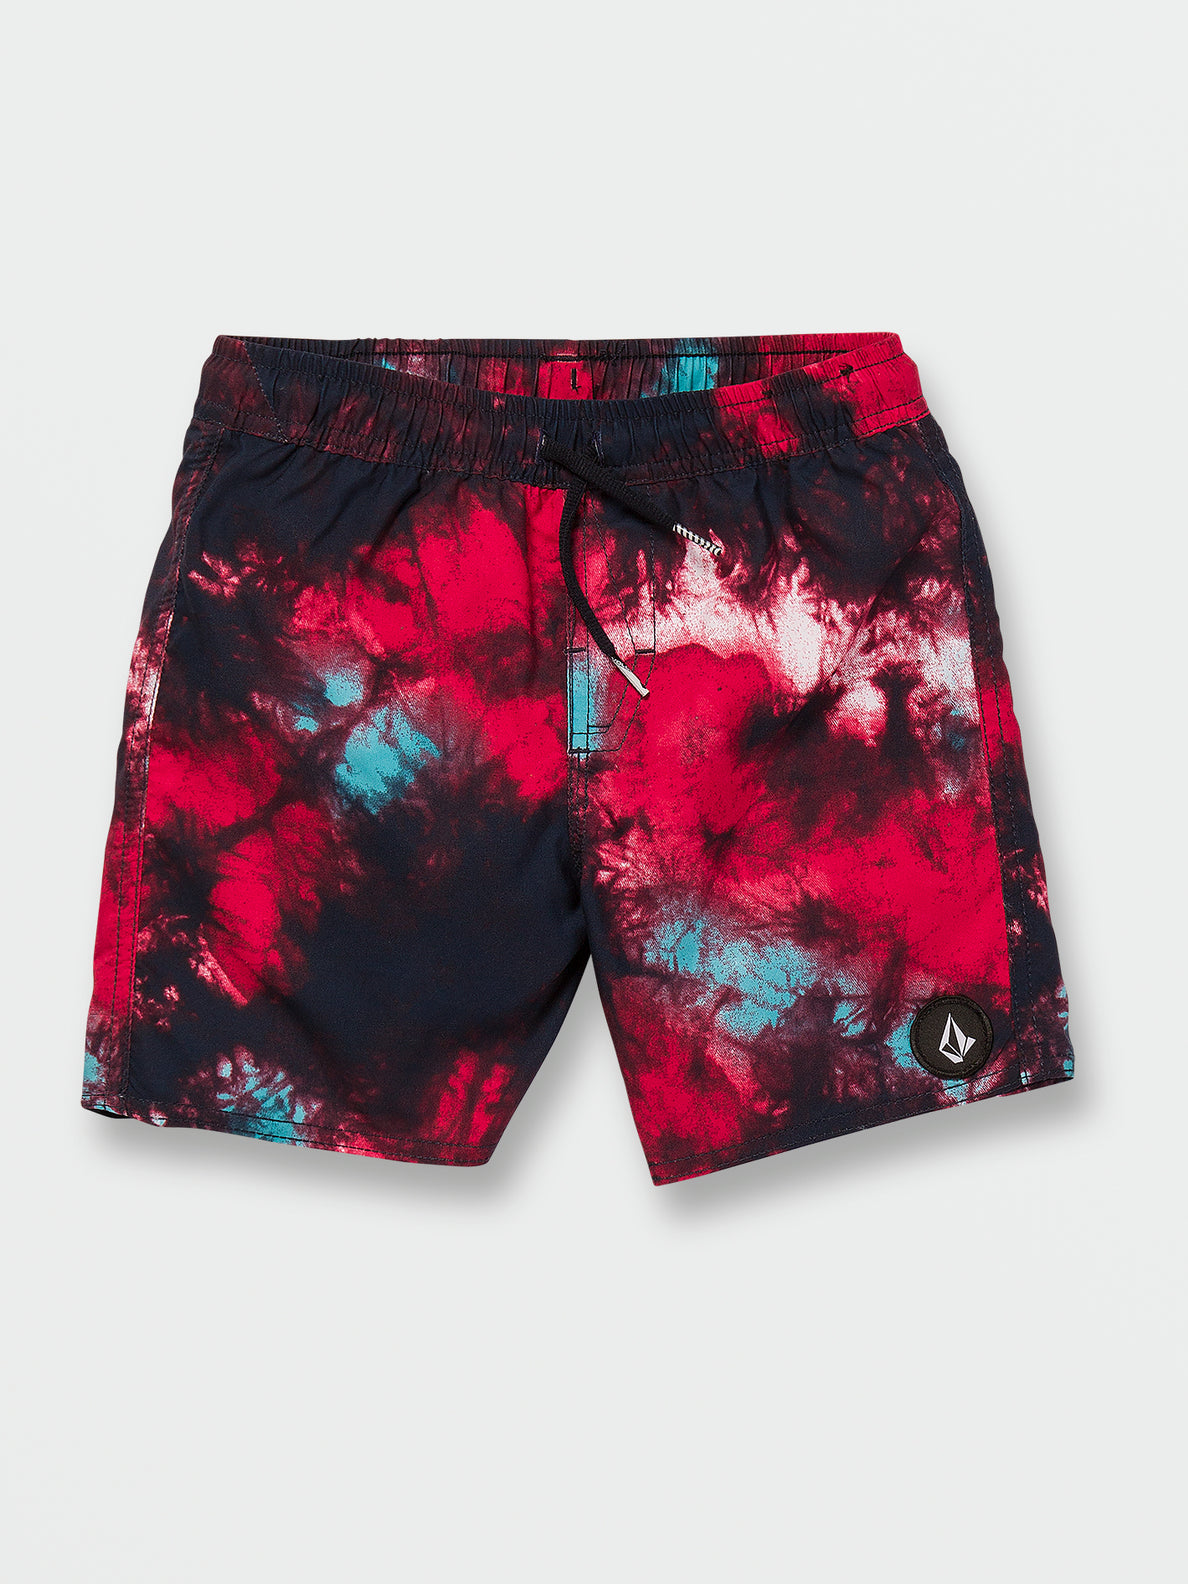 Little Boys Saturate Trunks - Red